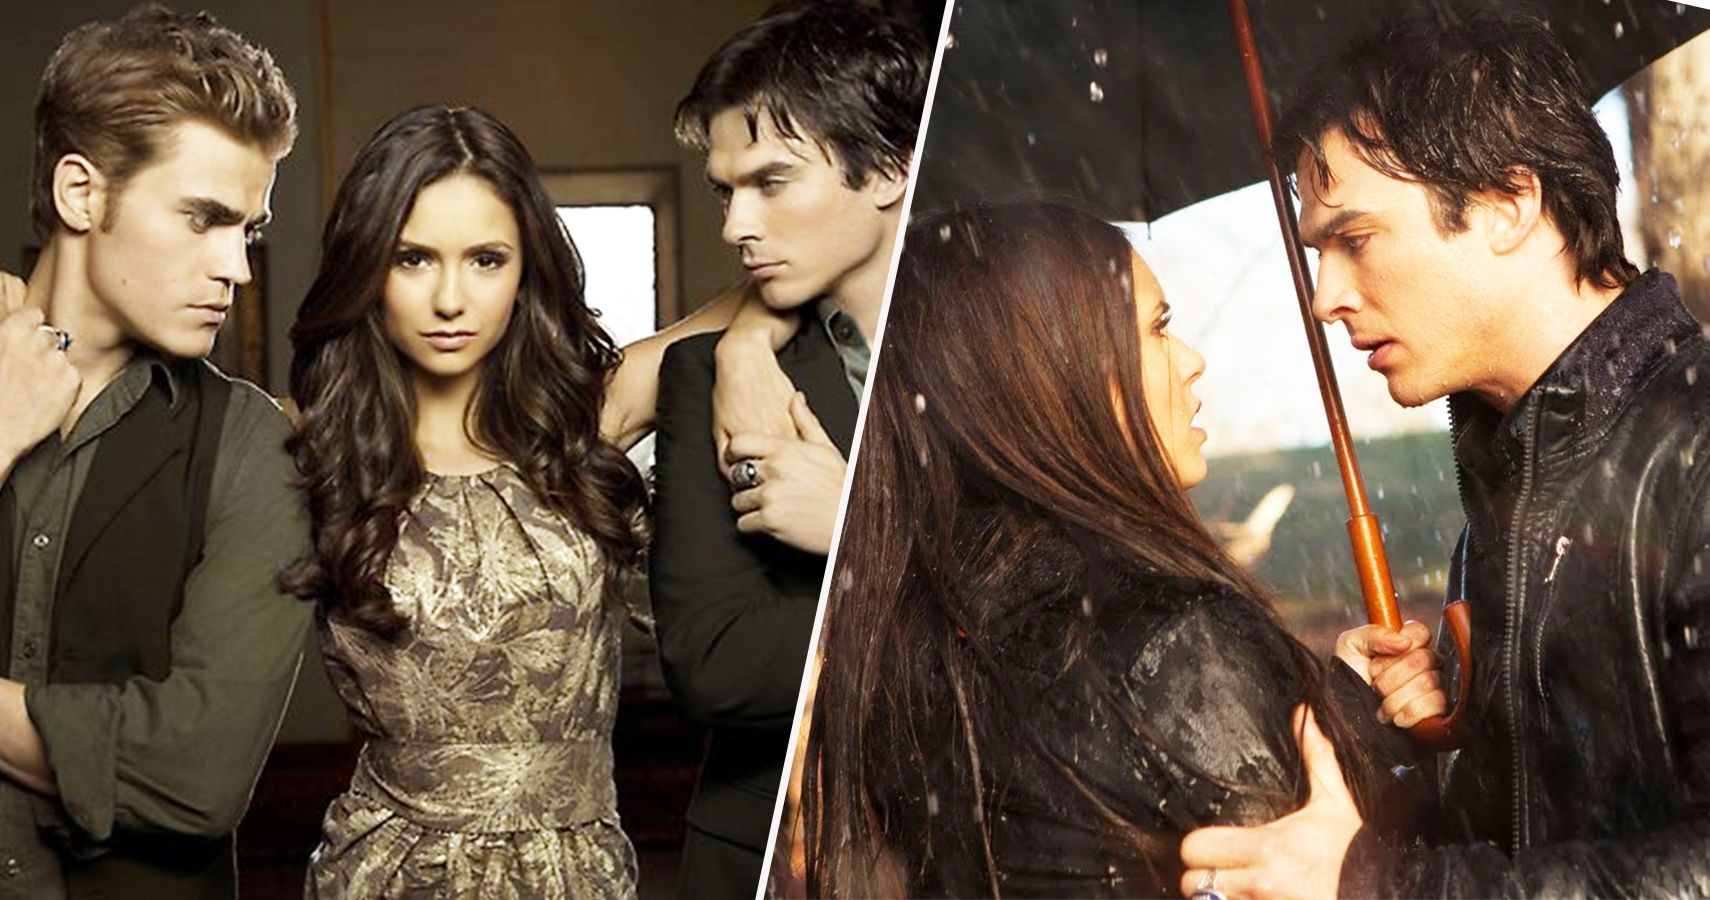 The Vampire Diaries 5 Reasons Why Stelena Should Have Been Endgame (& 5 Why It Was Delena)